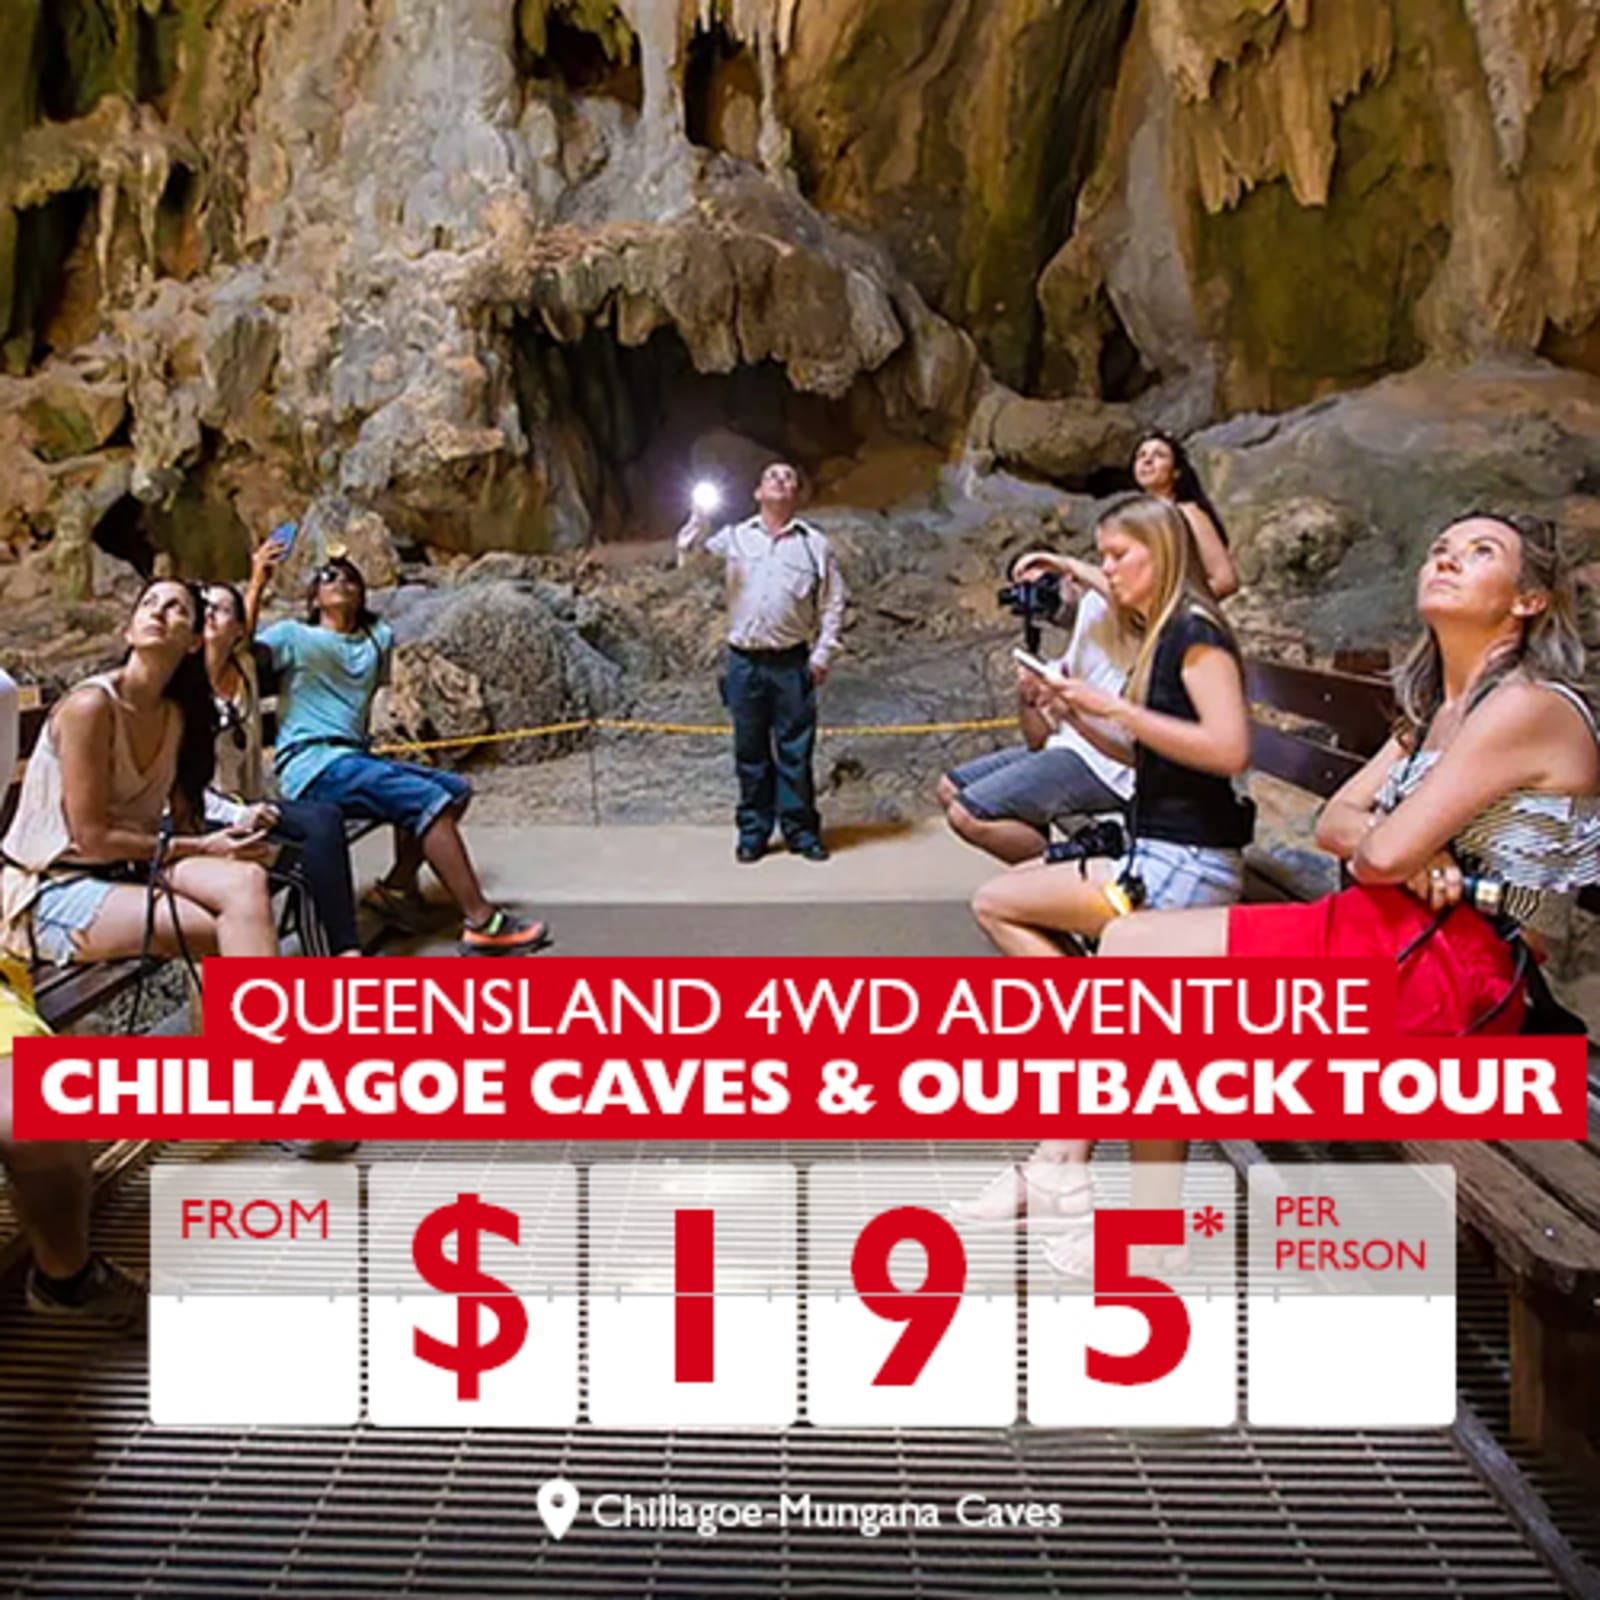 Queensland 4WD adventure | Chillagoe caves & outback tour from $195* per person